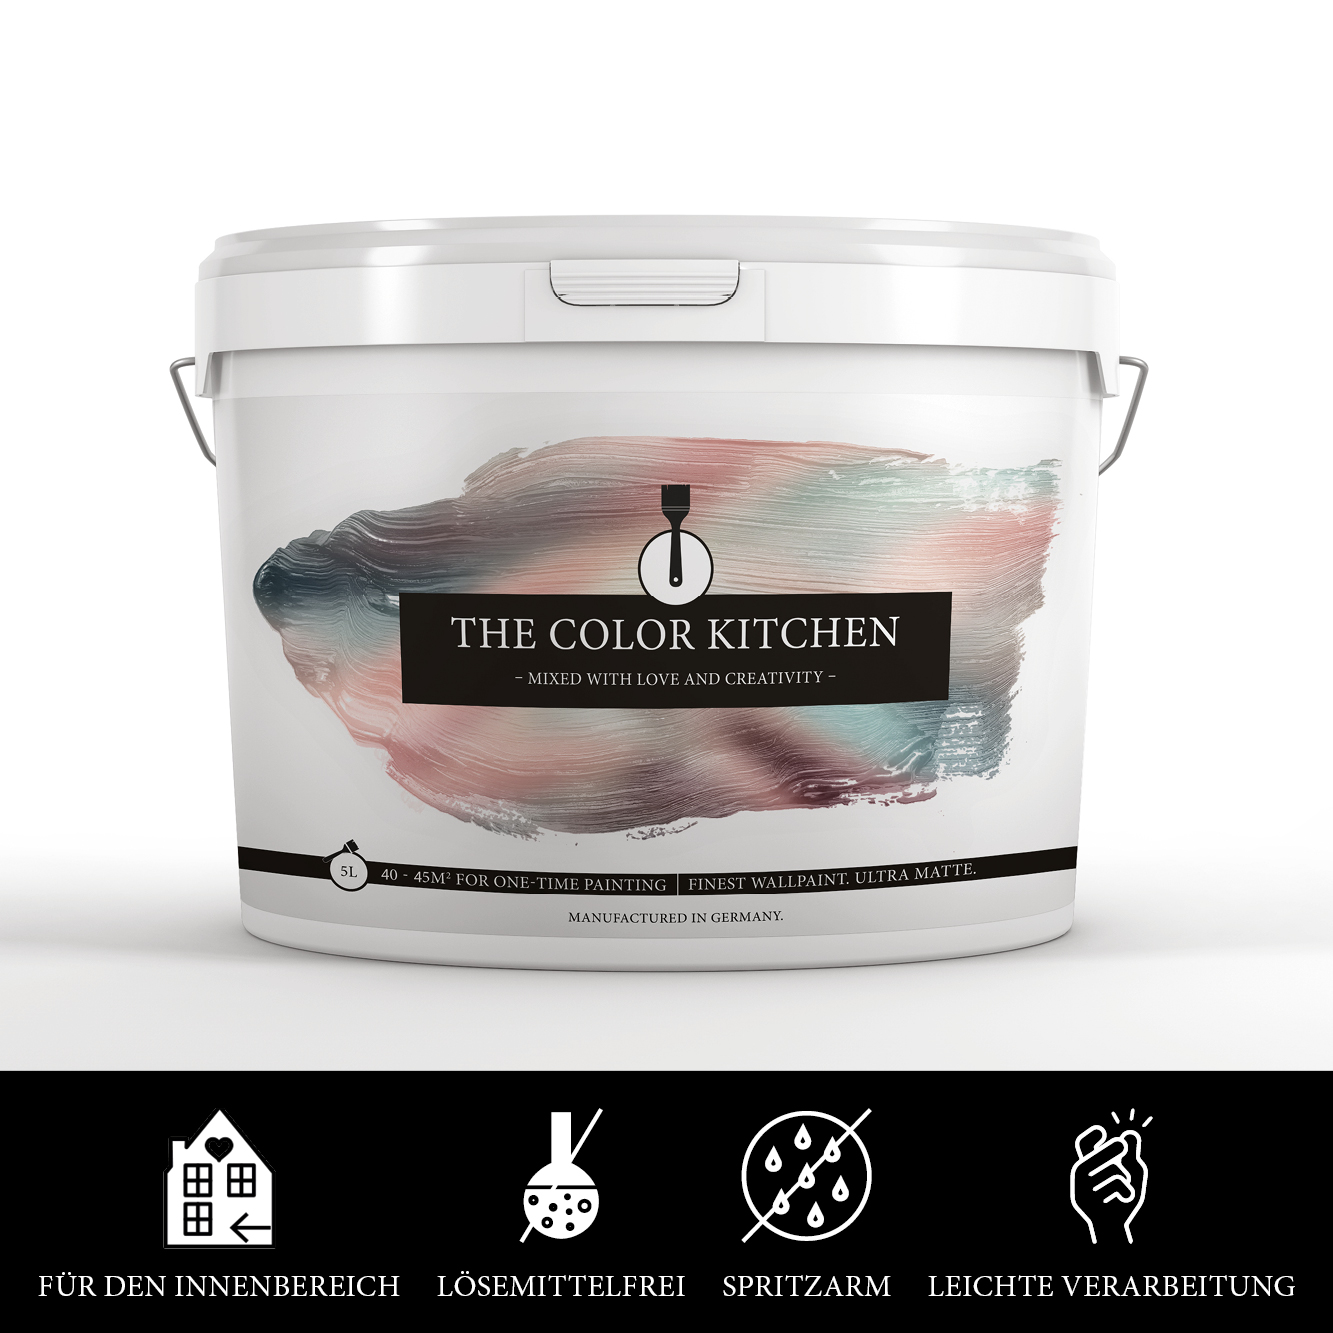 The Color Kitchen Ritzy Rosemary 5 l